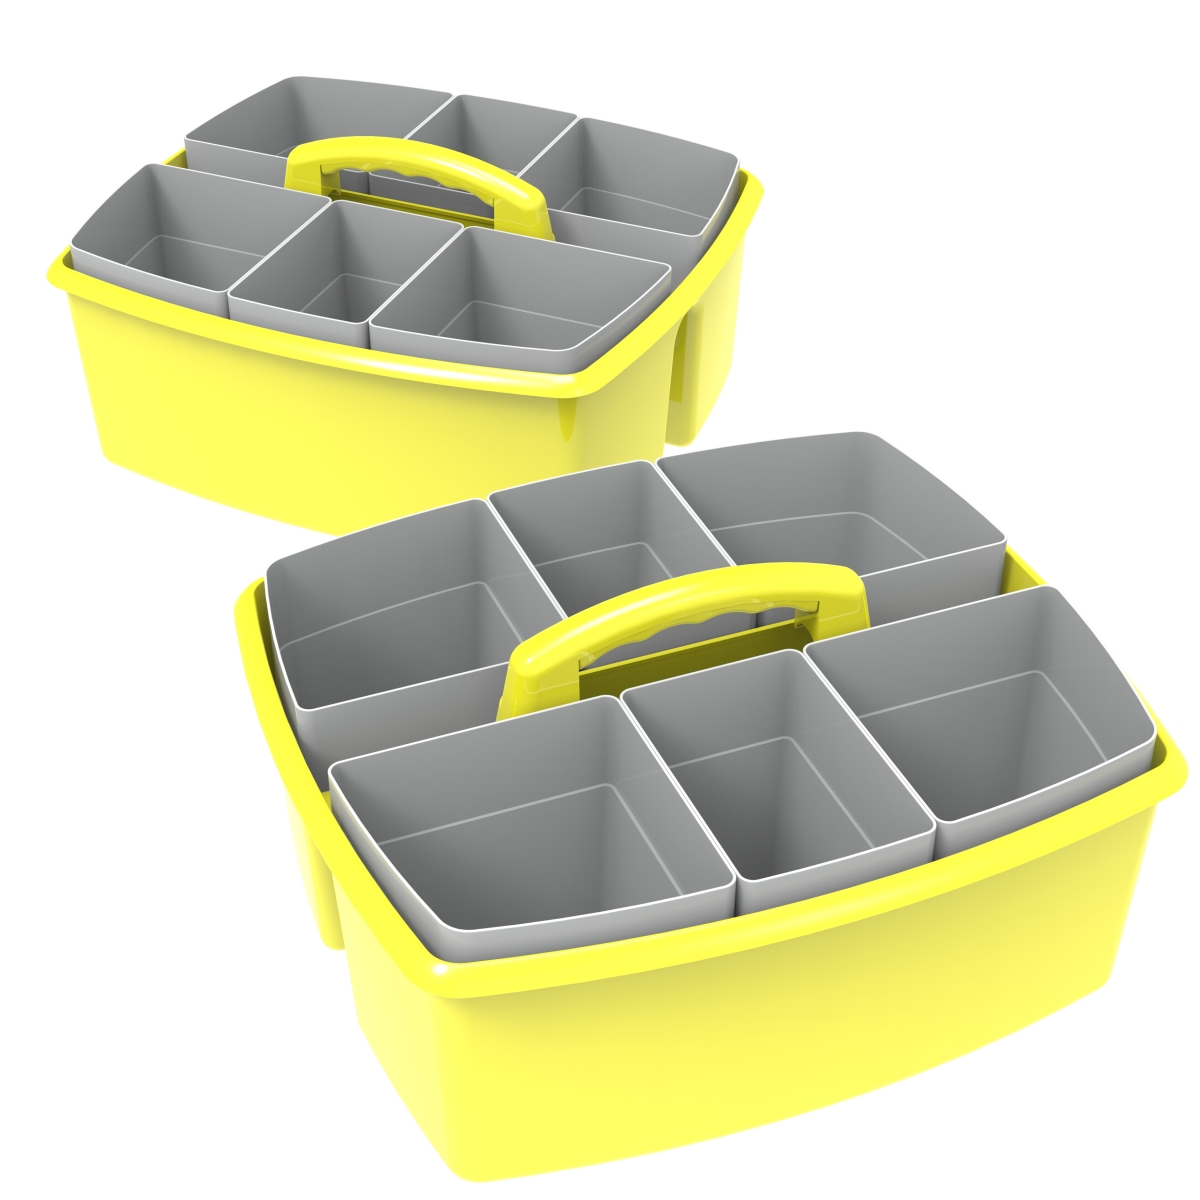 Picture of Storex 00982U02C Large Caddy with Sorting Cups, Yellow - Pack of 2